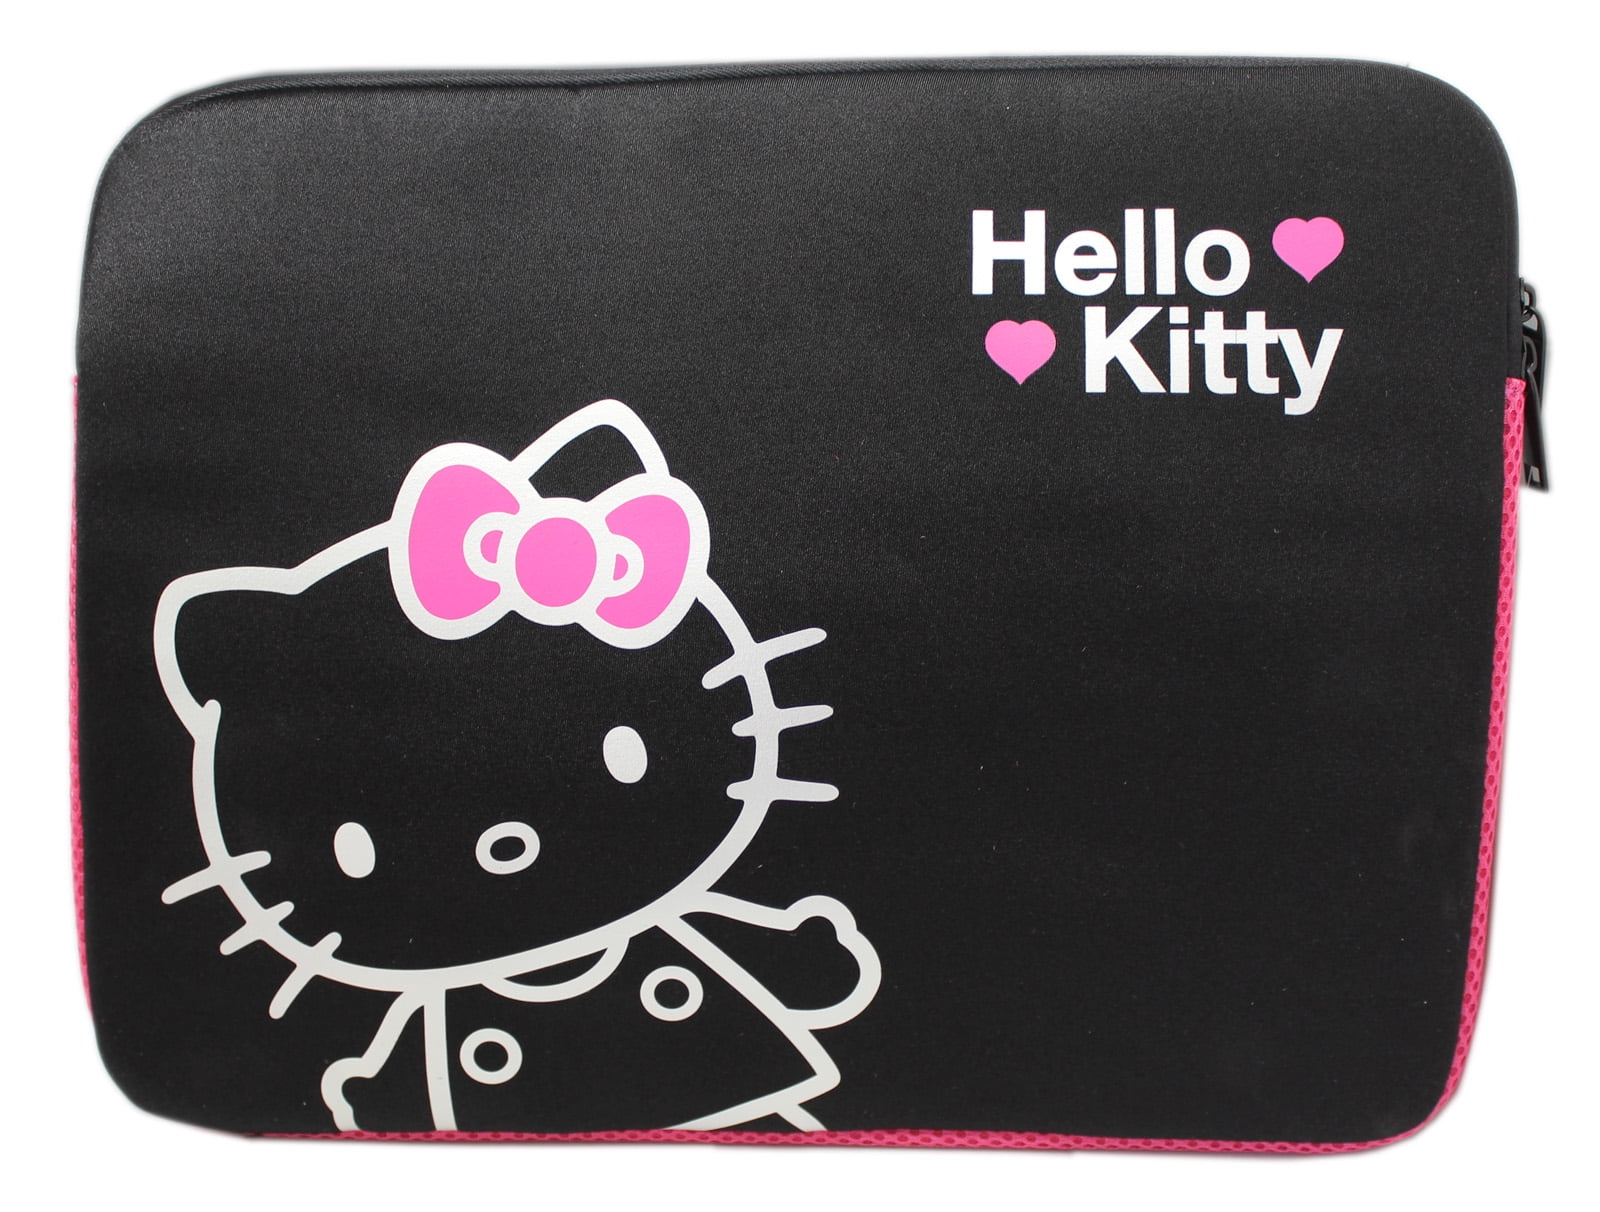 Cleaning Brush,Laptop Case A Variety of Models Laptop Hard Shell Case for MacBook Air 13 Hello Kitty Cover with Hard Shell Case 